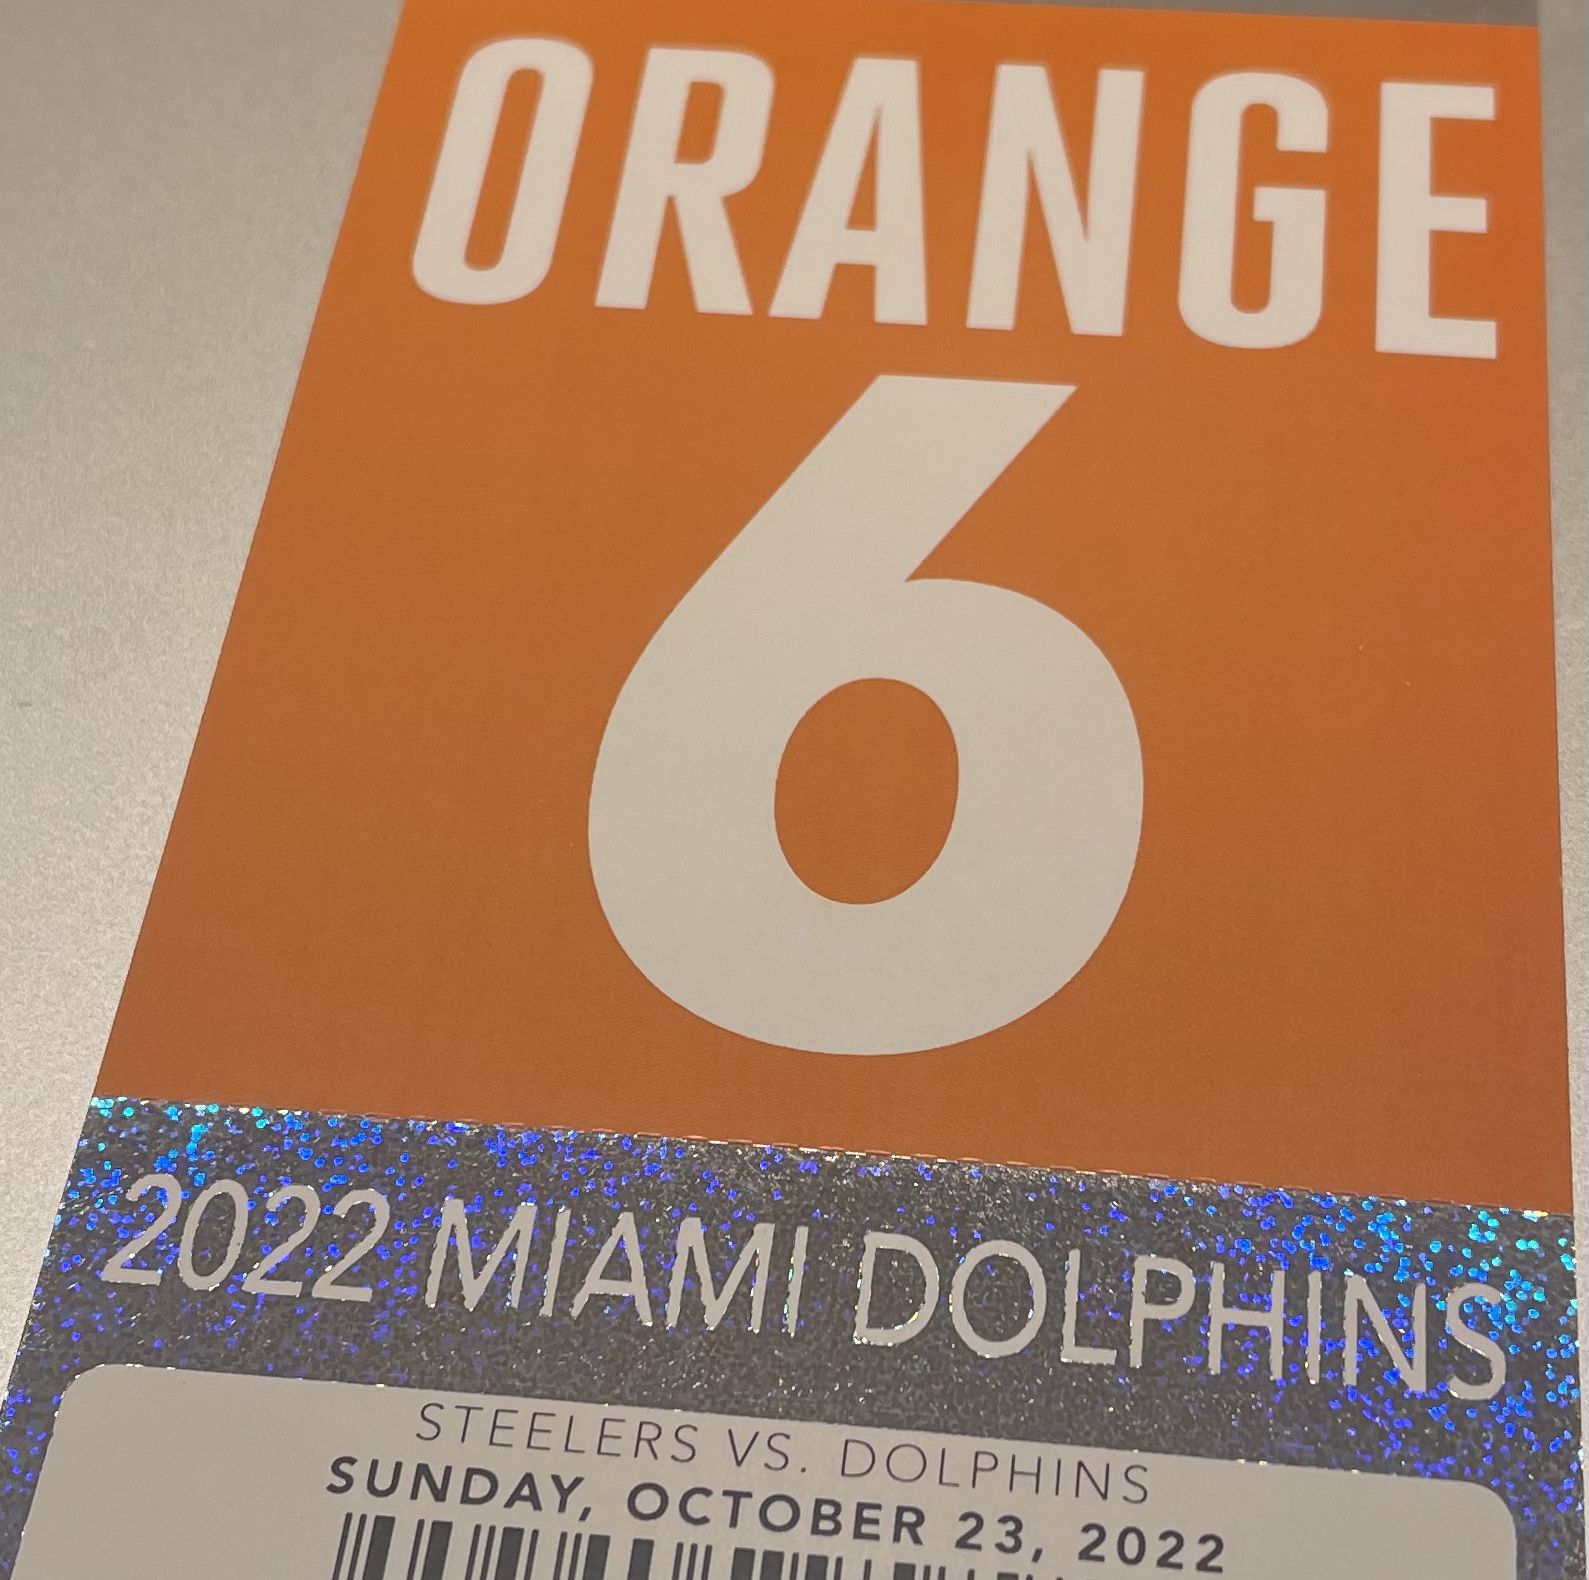 Orange lot Parking pass Miami dolphins V. Pittsburgh Steelers $200